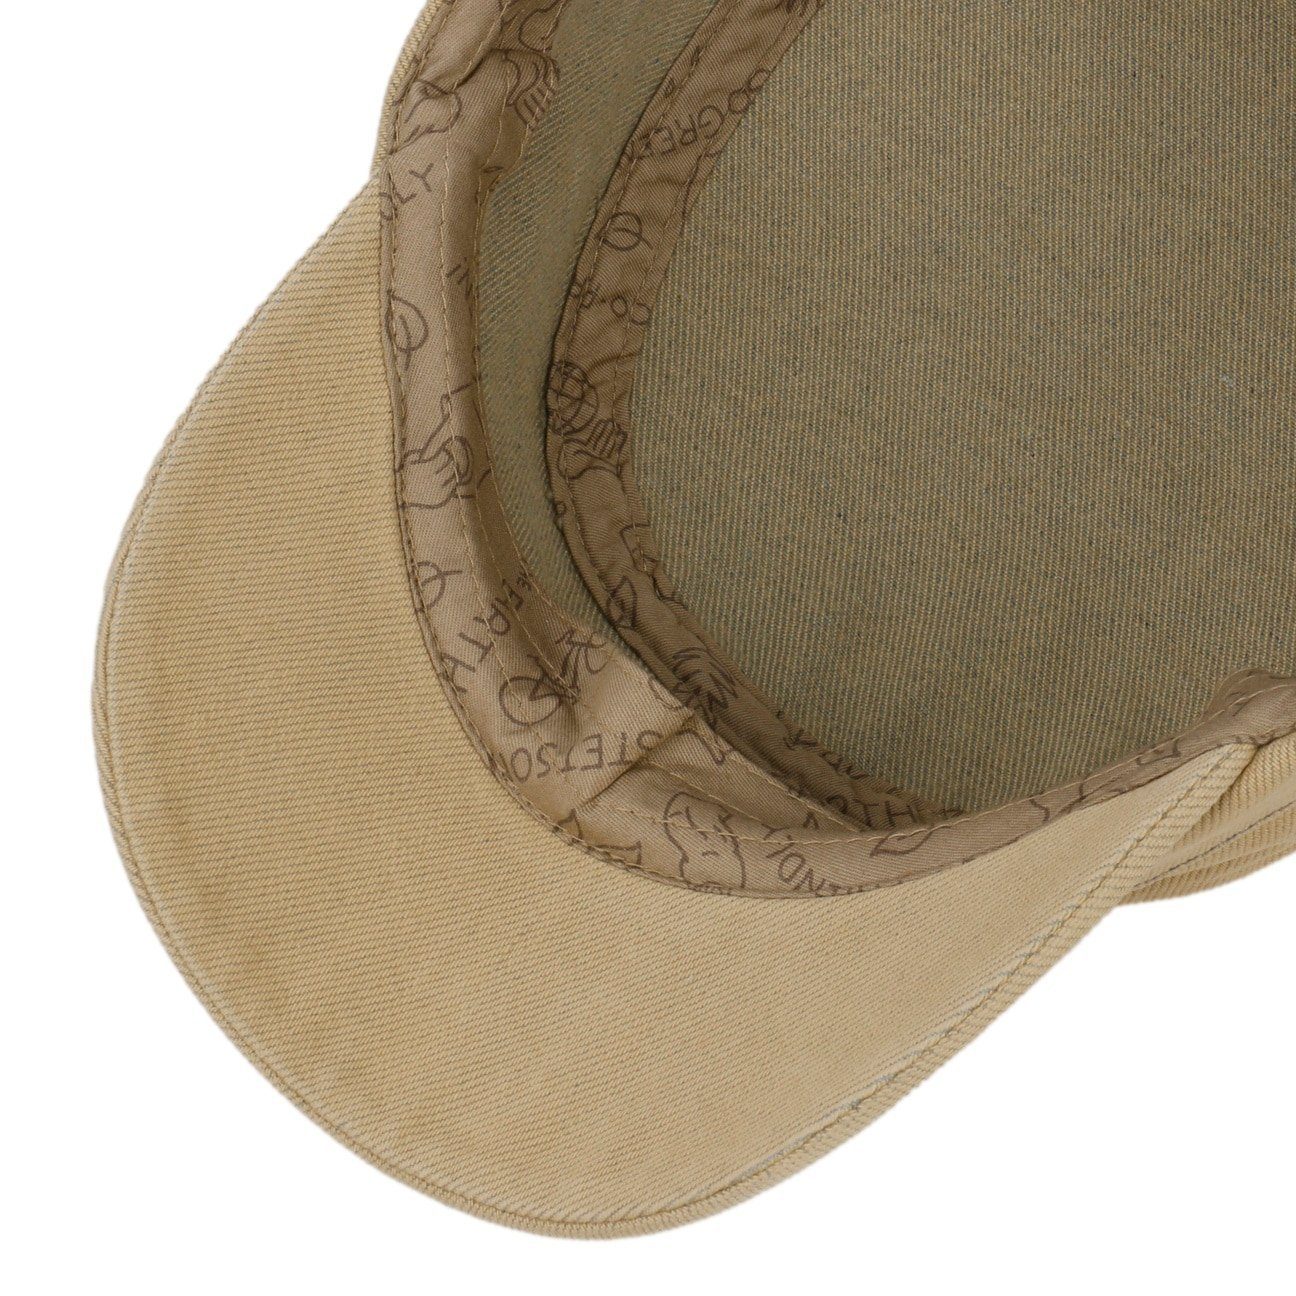 Stetson mit Cap Army the Armycap Made EU (1-St) Schirm, in